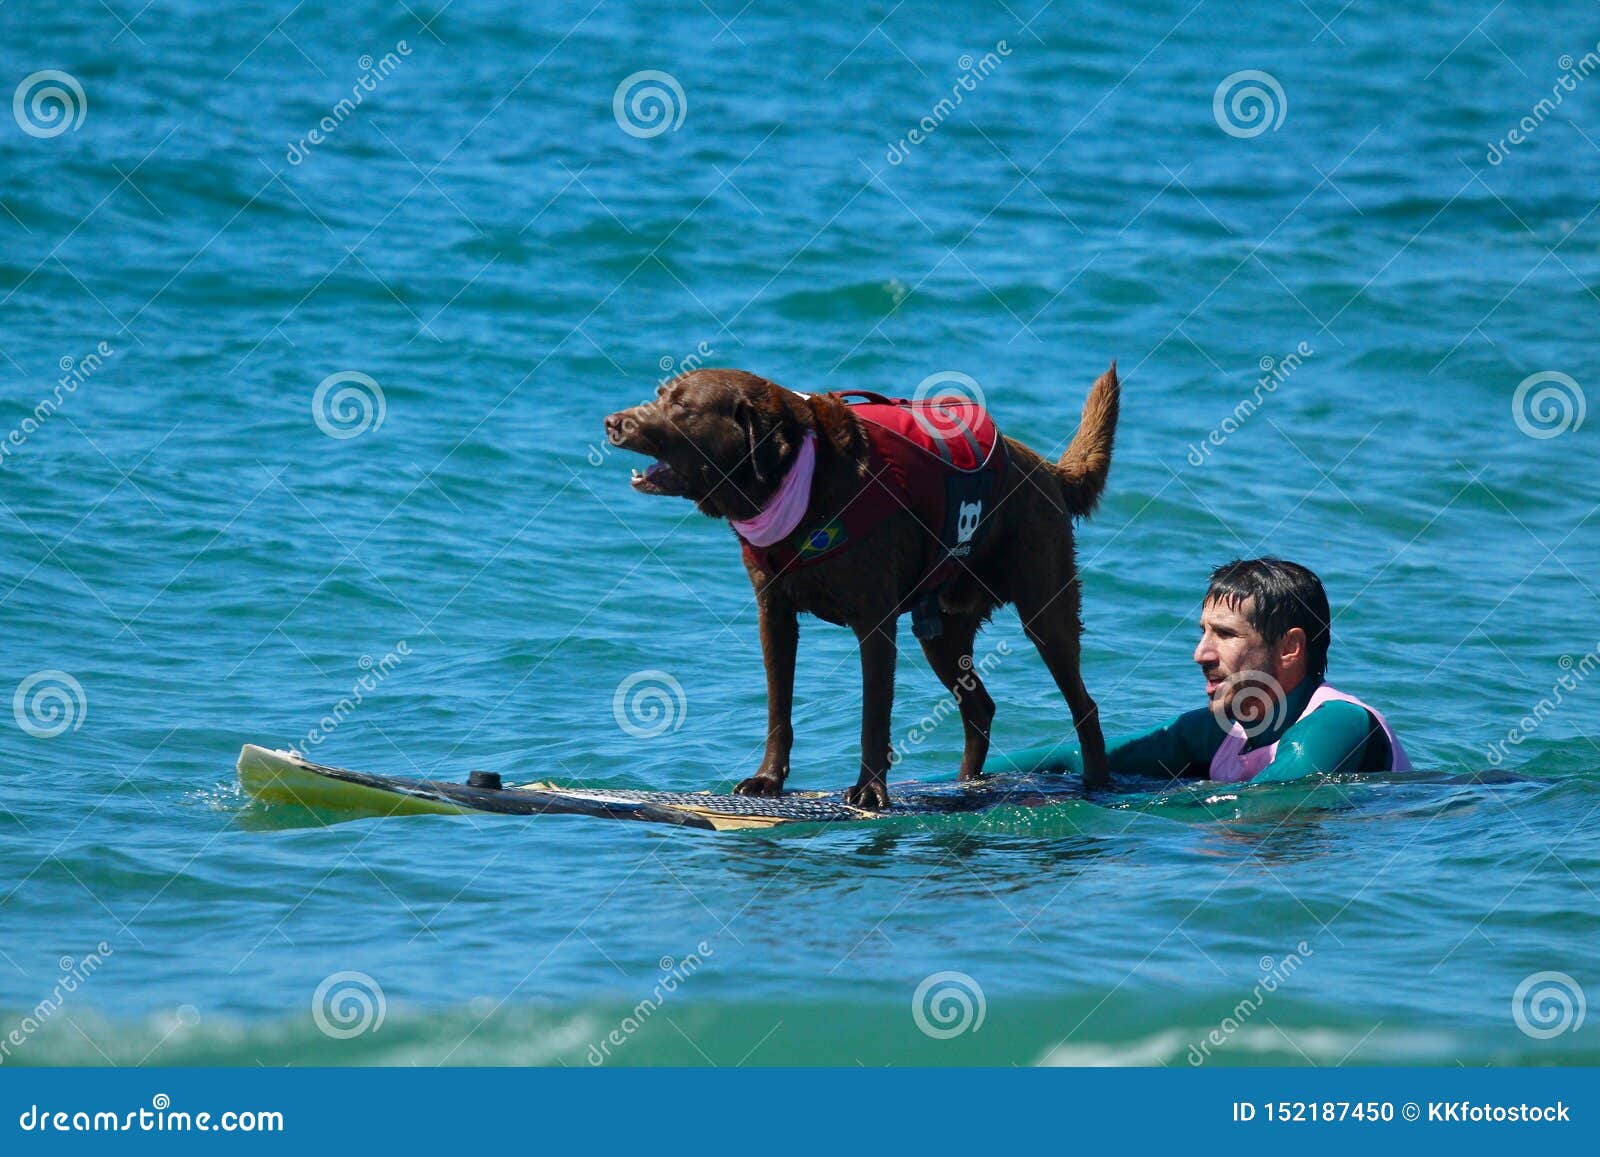 Dog Surfing Event in Huntington Beach California Editorial Image